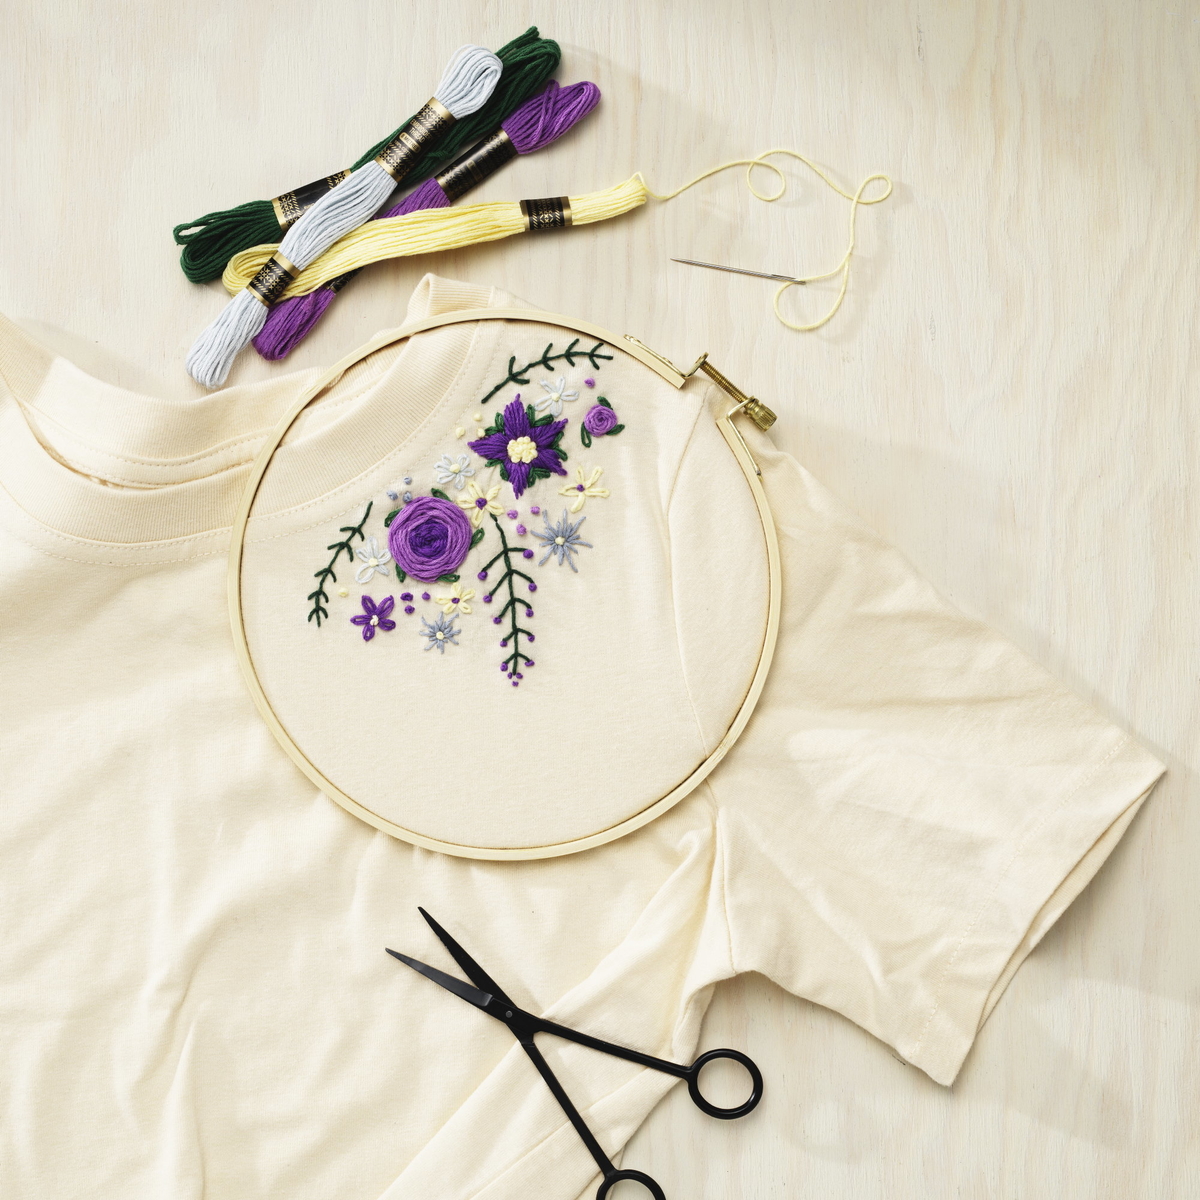 Cheer up a T-shirt with embroidery